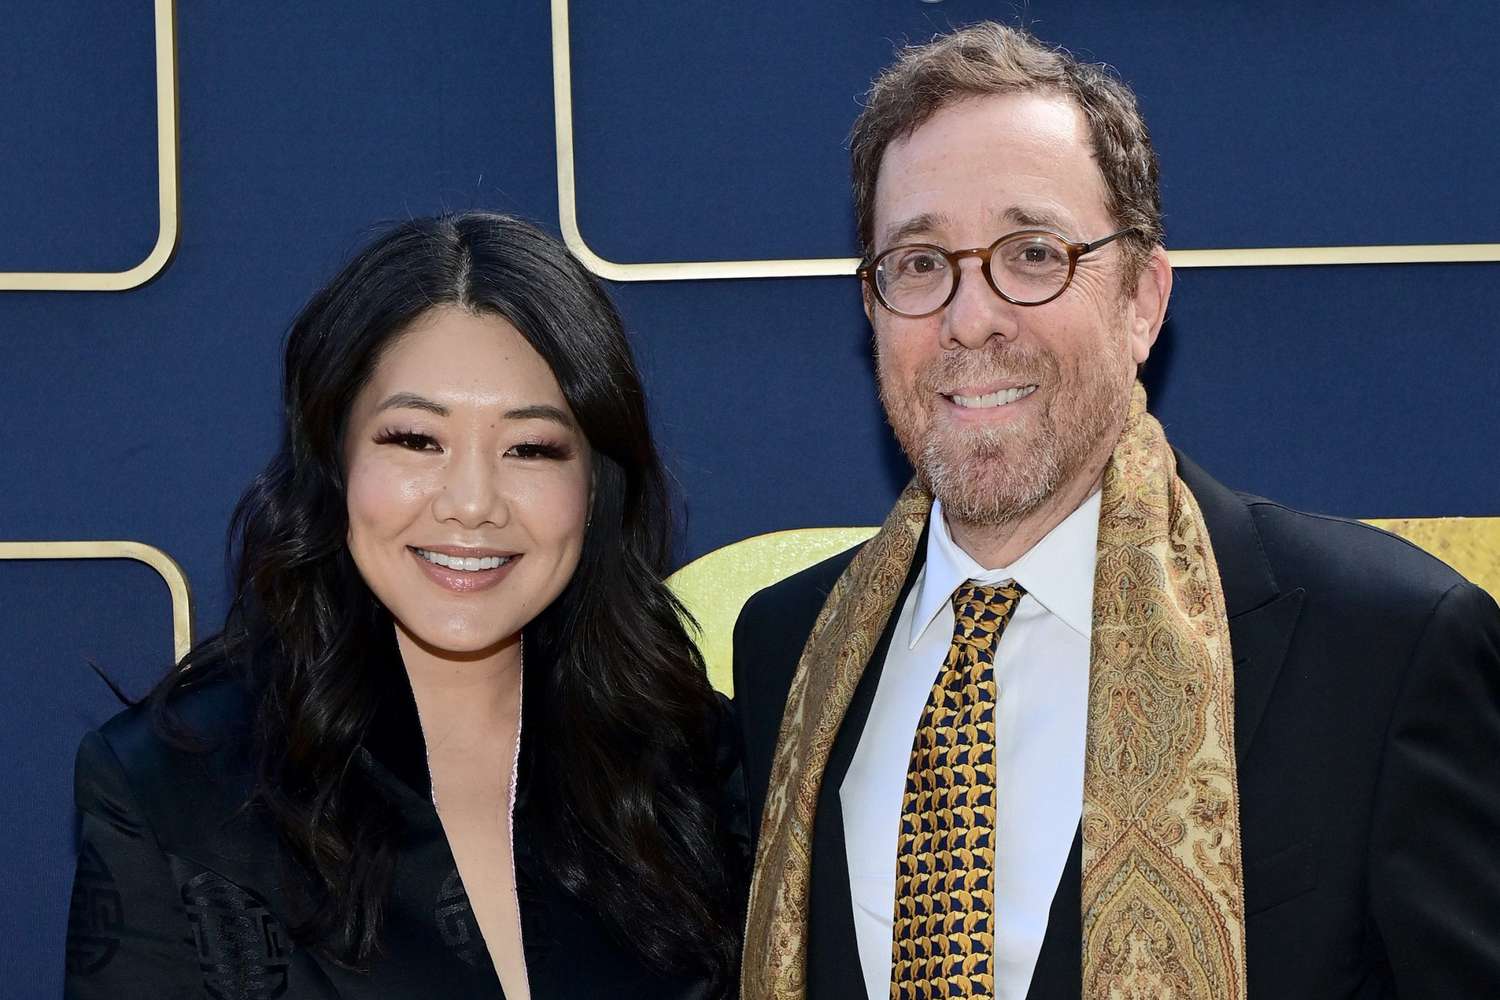 LOS ANGELES, CALIFORNIA - MAY 21: (L-R) Crystal Kung Minkoff and Rob Minkoff attends Gold House's Inaugural Gold Gala: A New Gold Age at Vibiana on May 21, 2022 in Los Angeles, California. (Photo by Stefanie Keenan/Getty Images for Gold House)